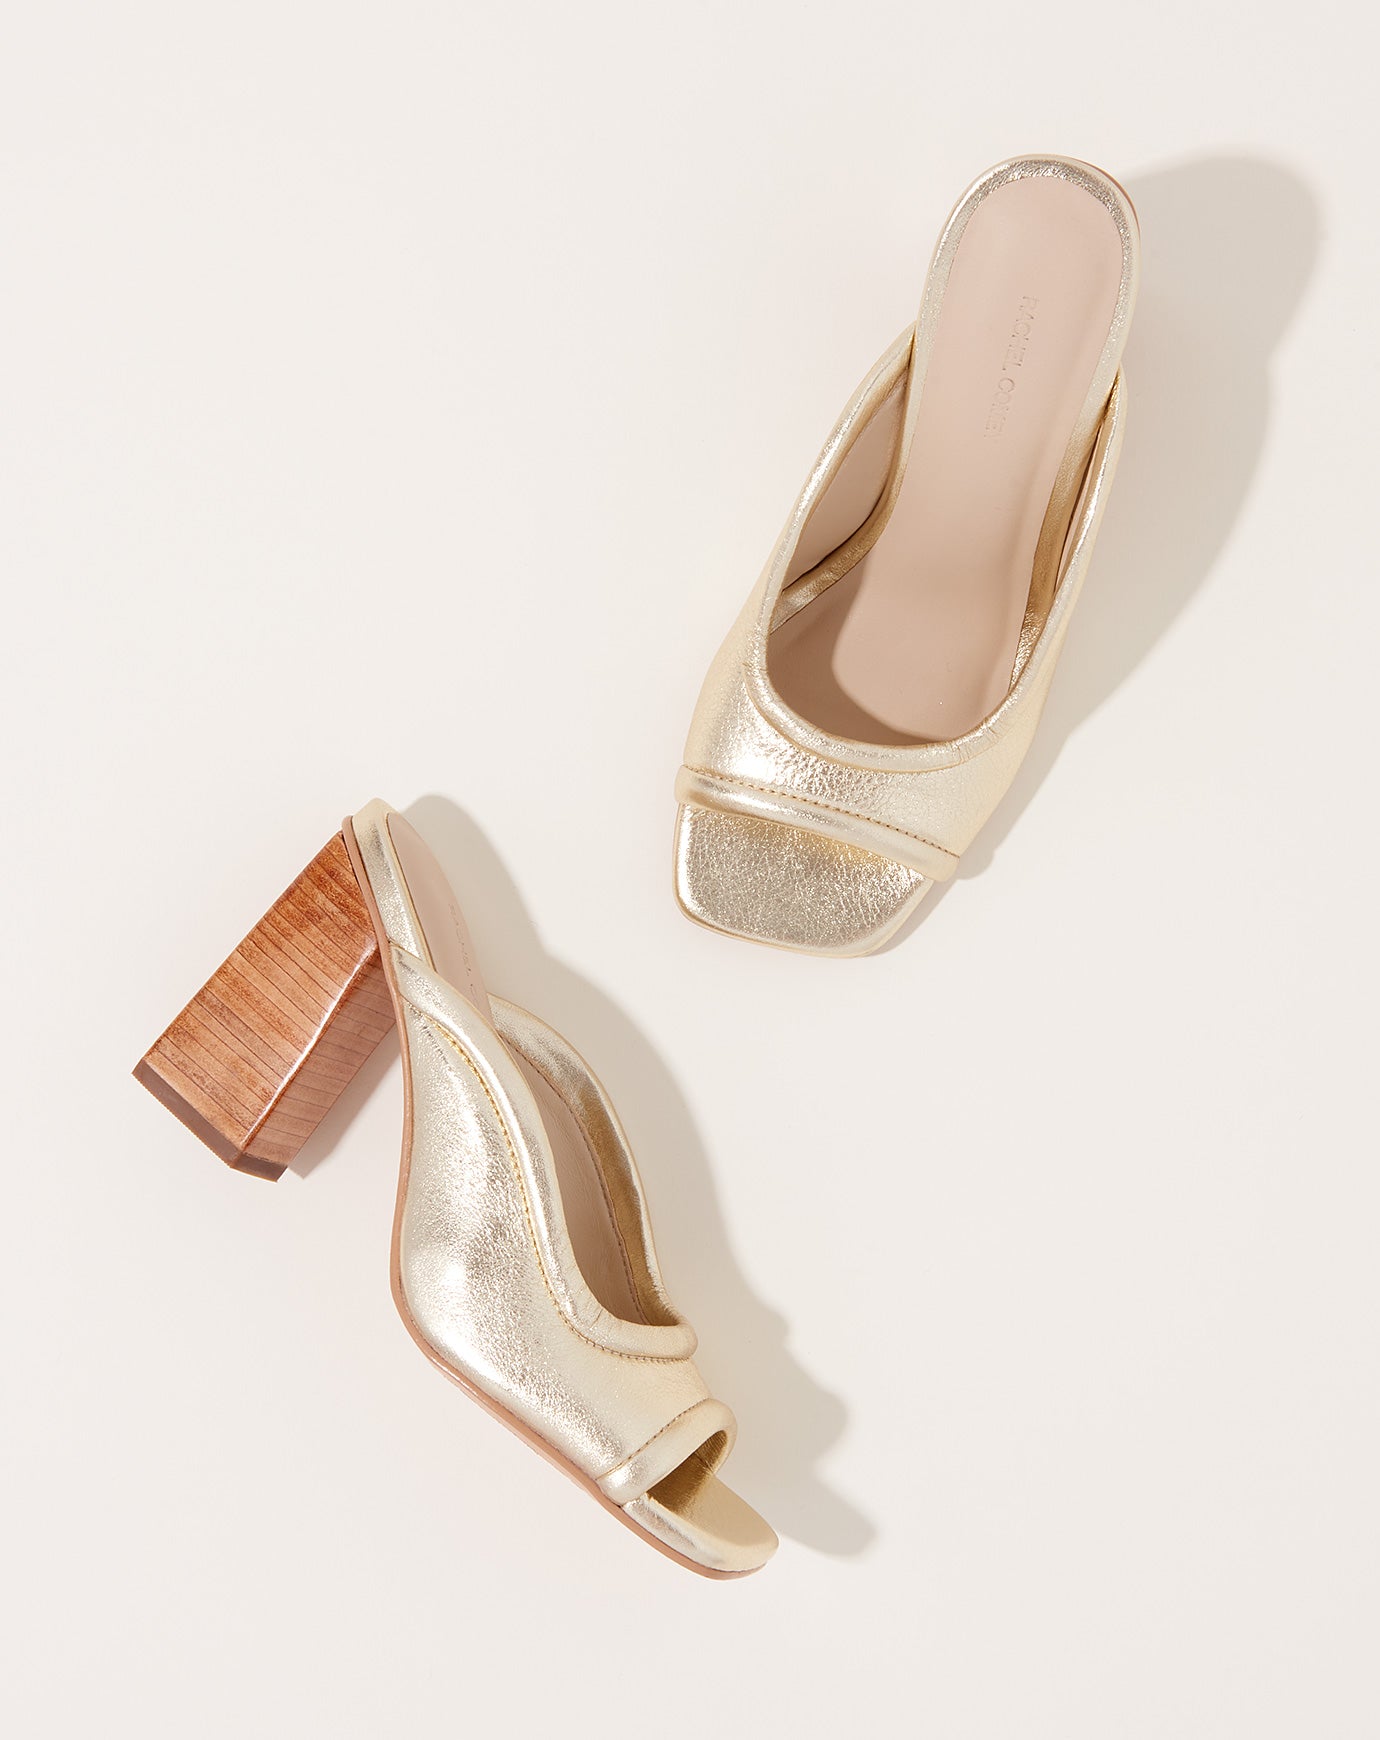 Rachel Comey Anora Sandal in Old Gold